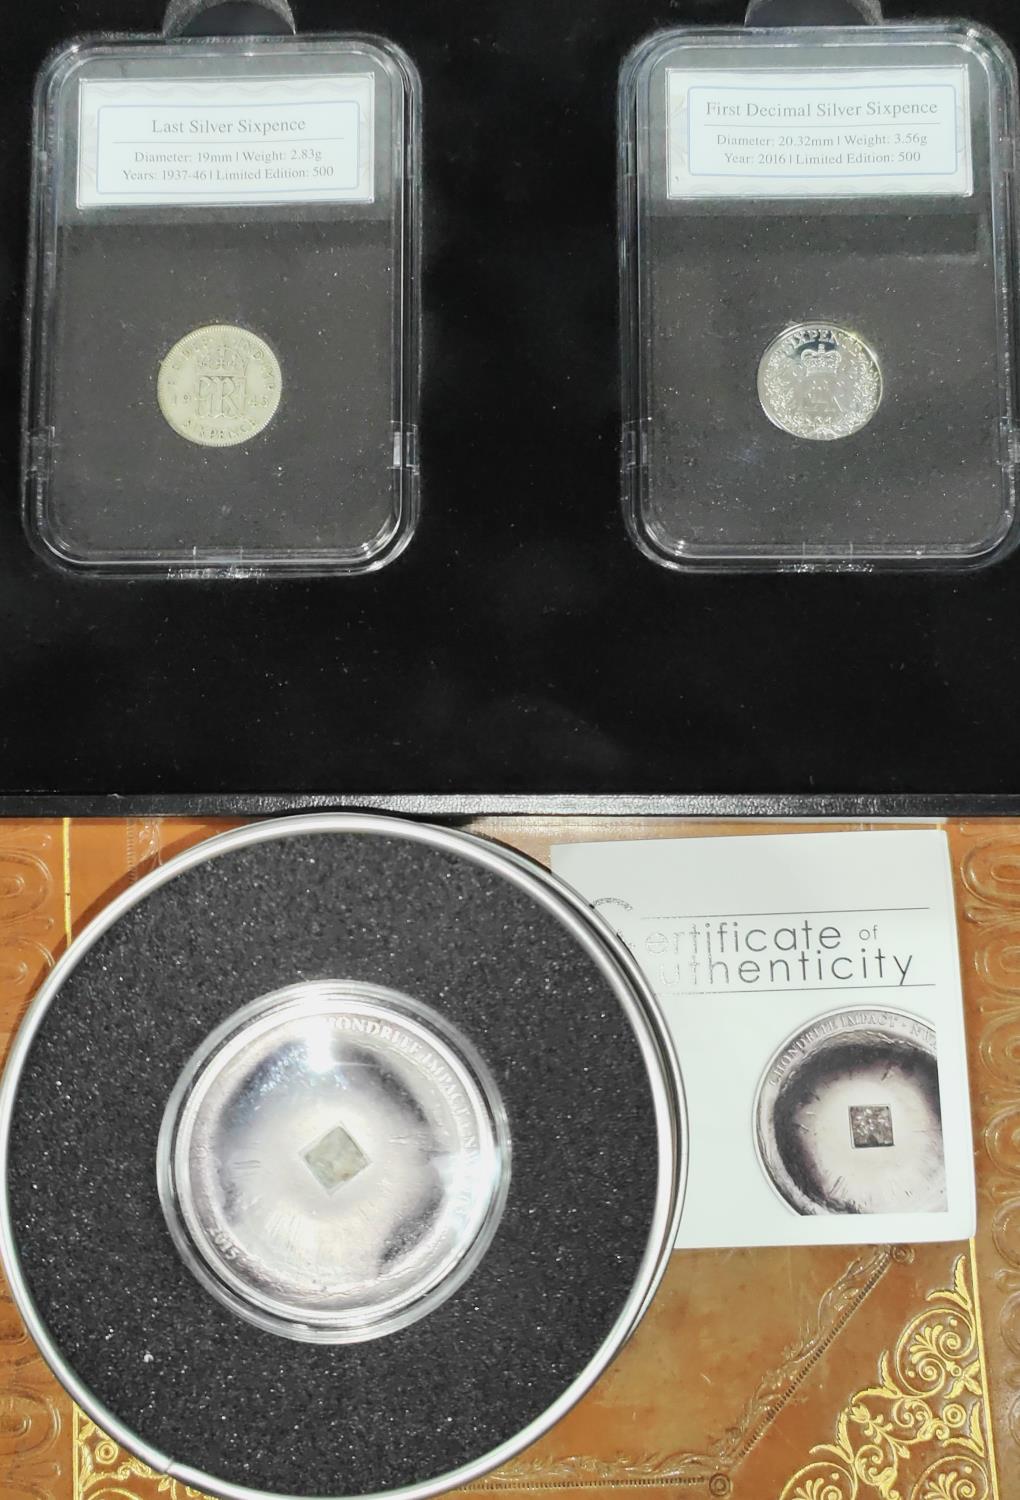 COOK ISLANDS: $5 Chondrite Impact silver coin, a silver sixpence pair, cased and Landmarks of the